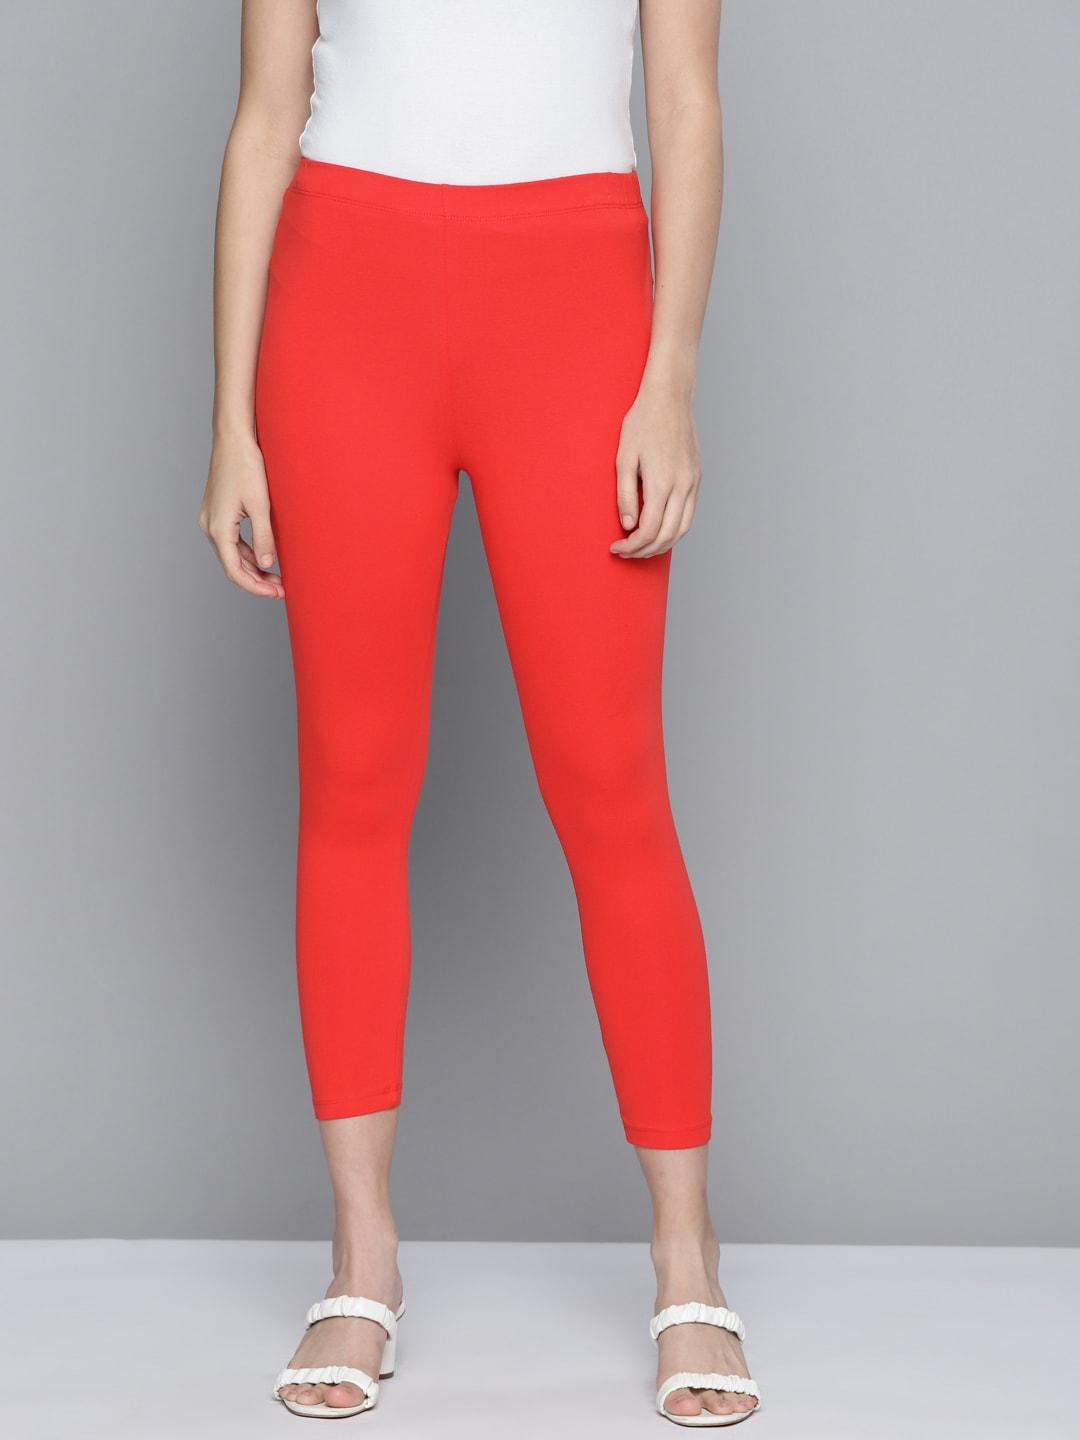 here&now-women-red-solid-ankle-length-leggings